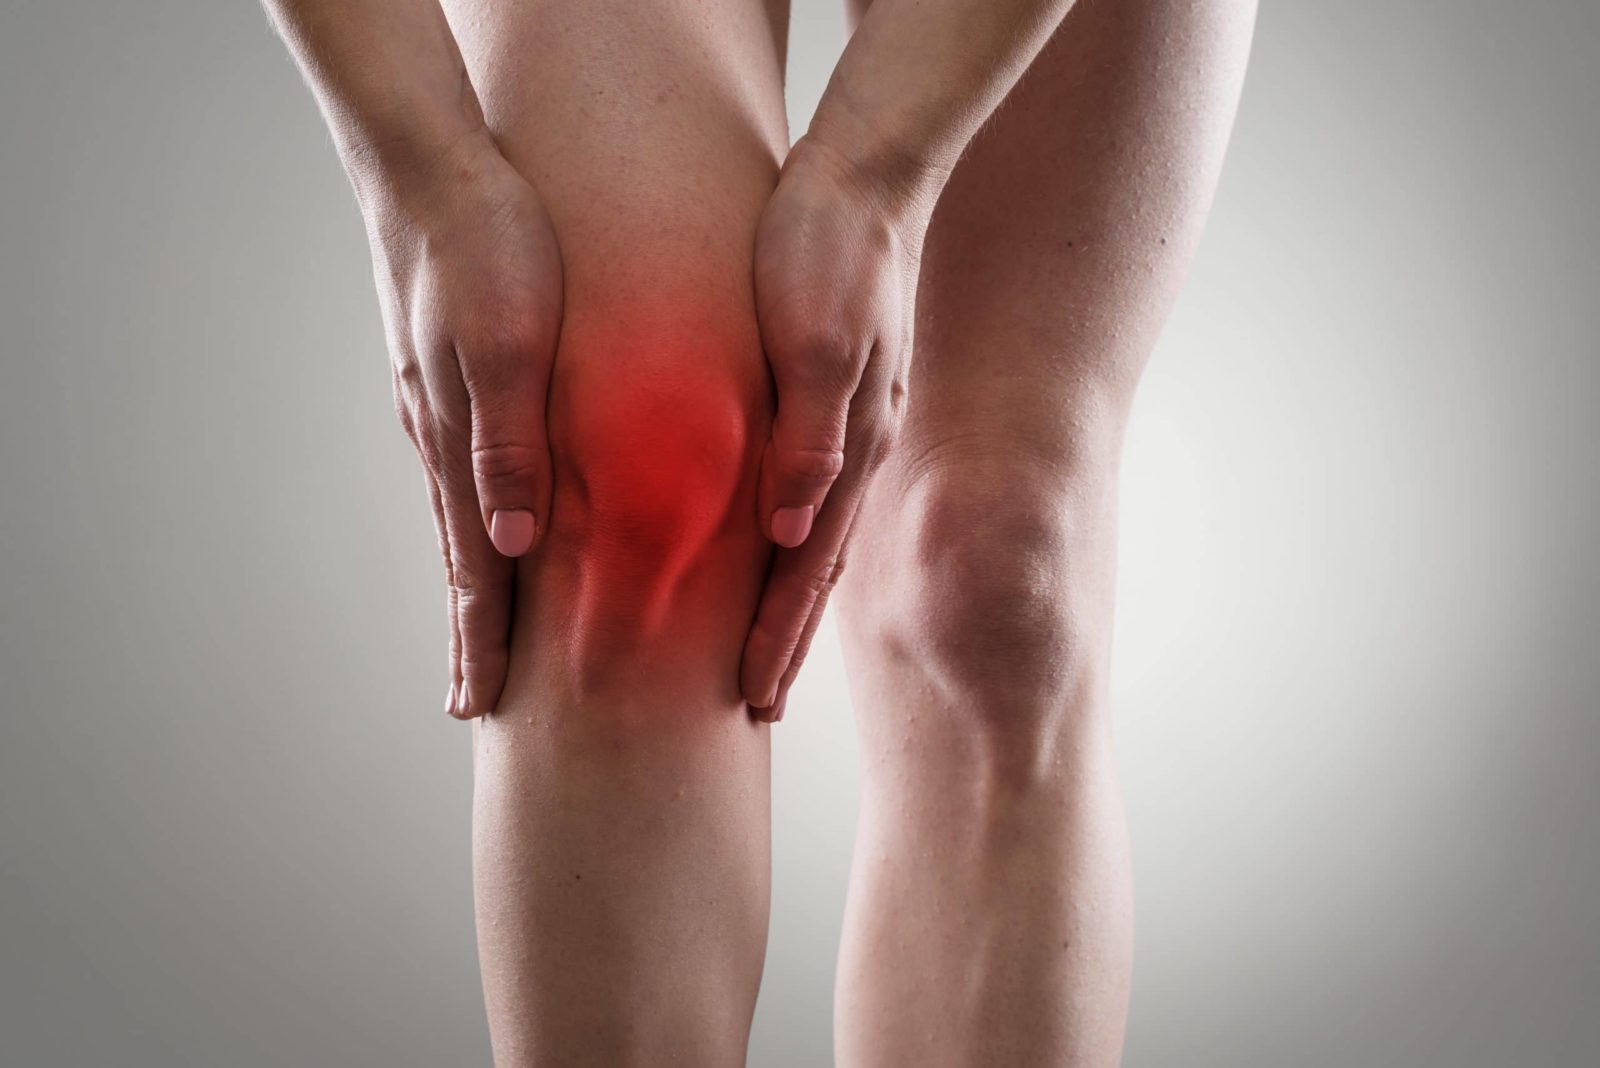 What Are The Causes Of Knee Pain When Bending? - Dr Sartawi